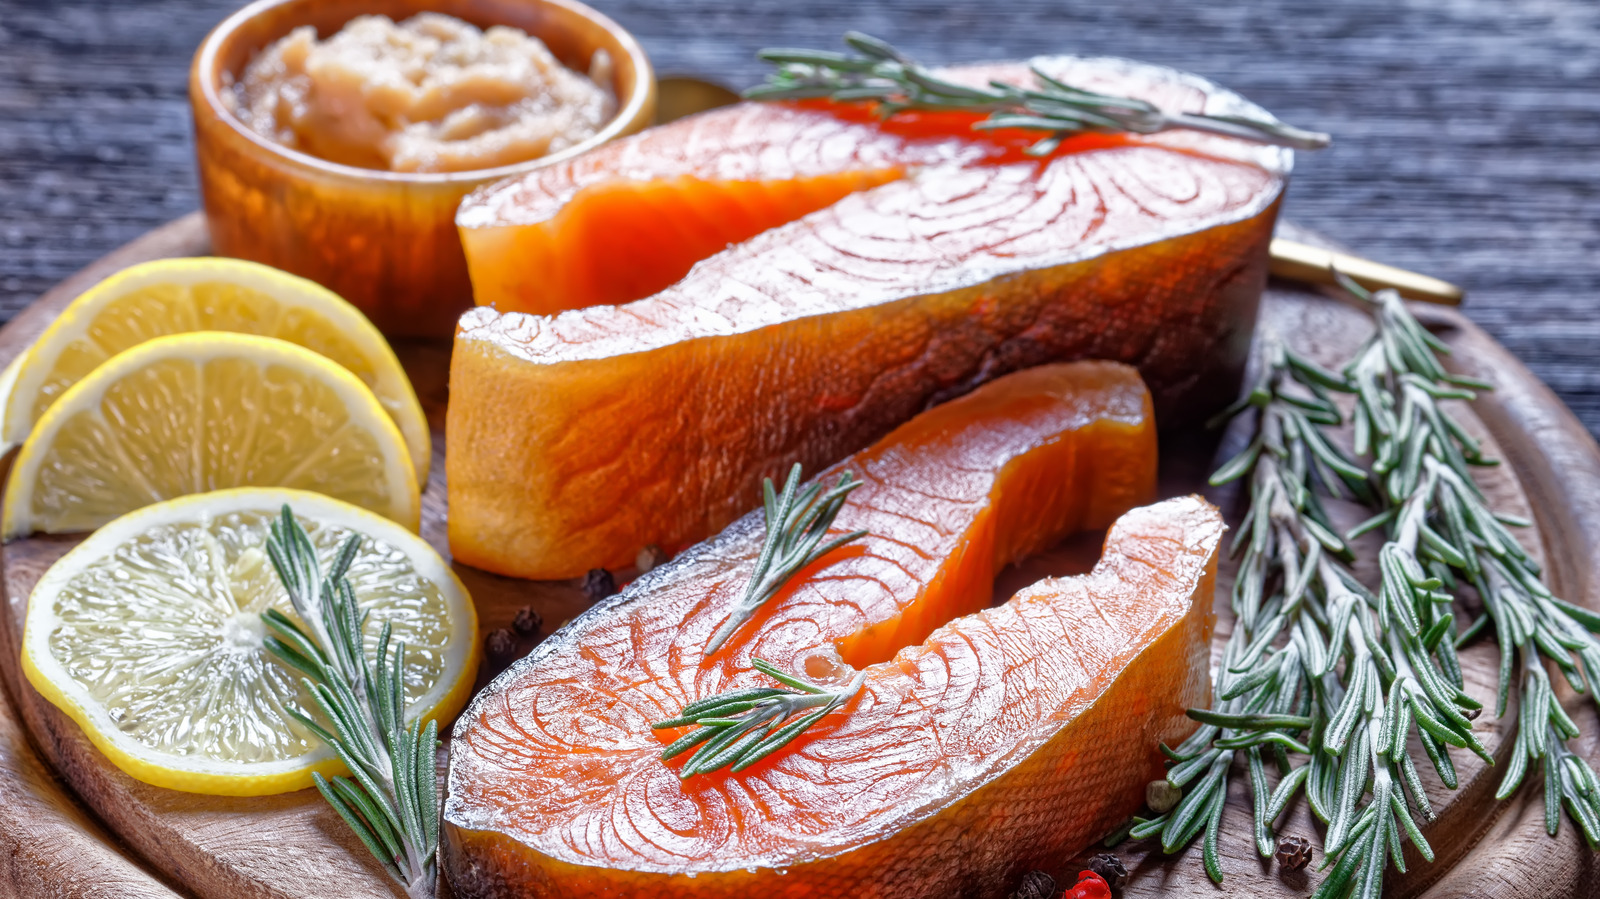 What is a cheap alternative to salmon?